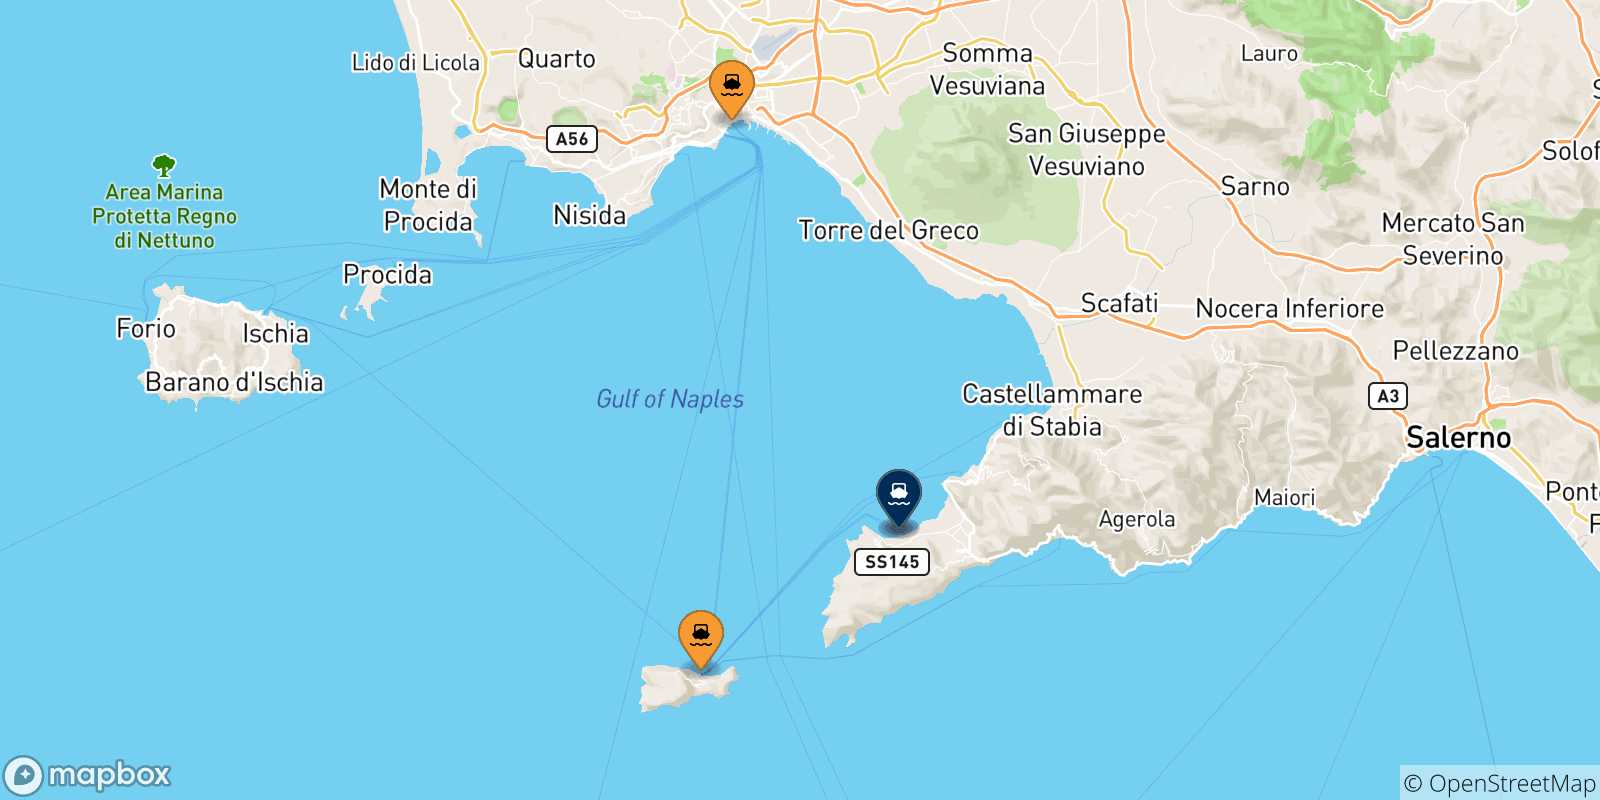 Map of the possible routes between Italy and Castellammare